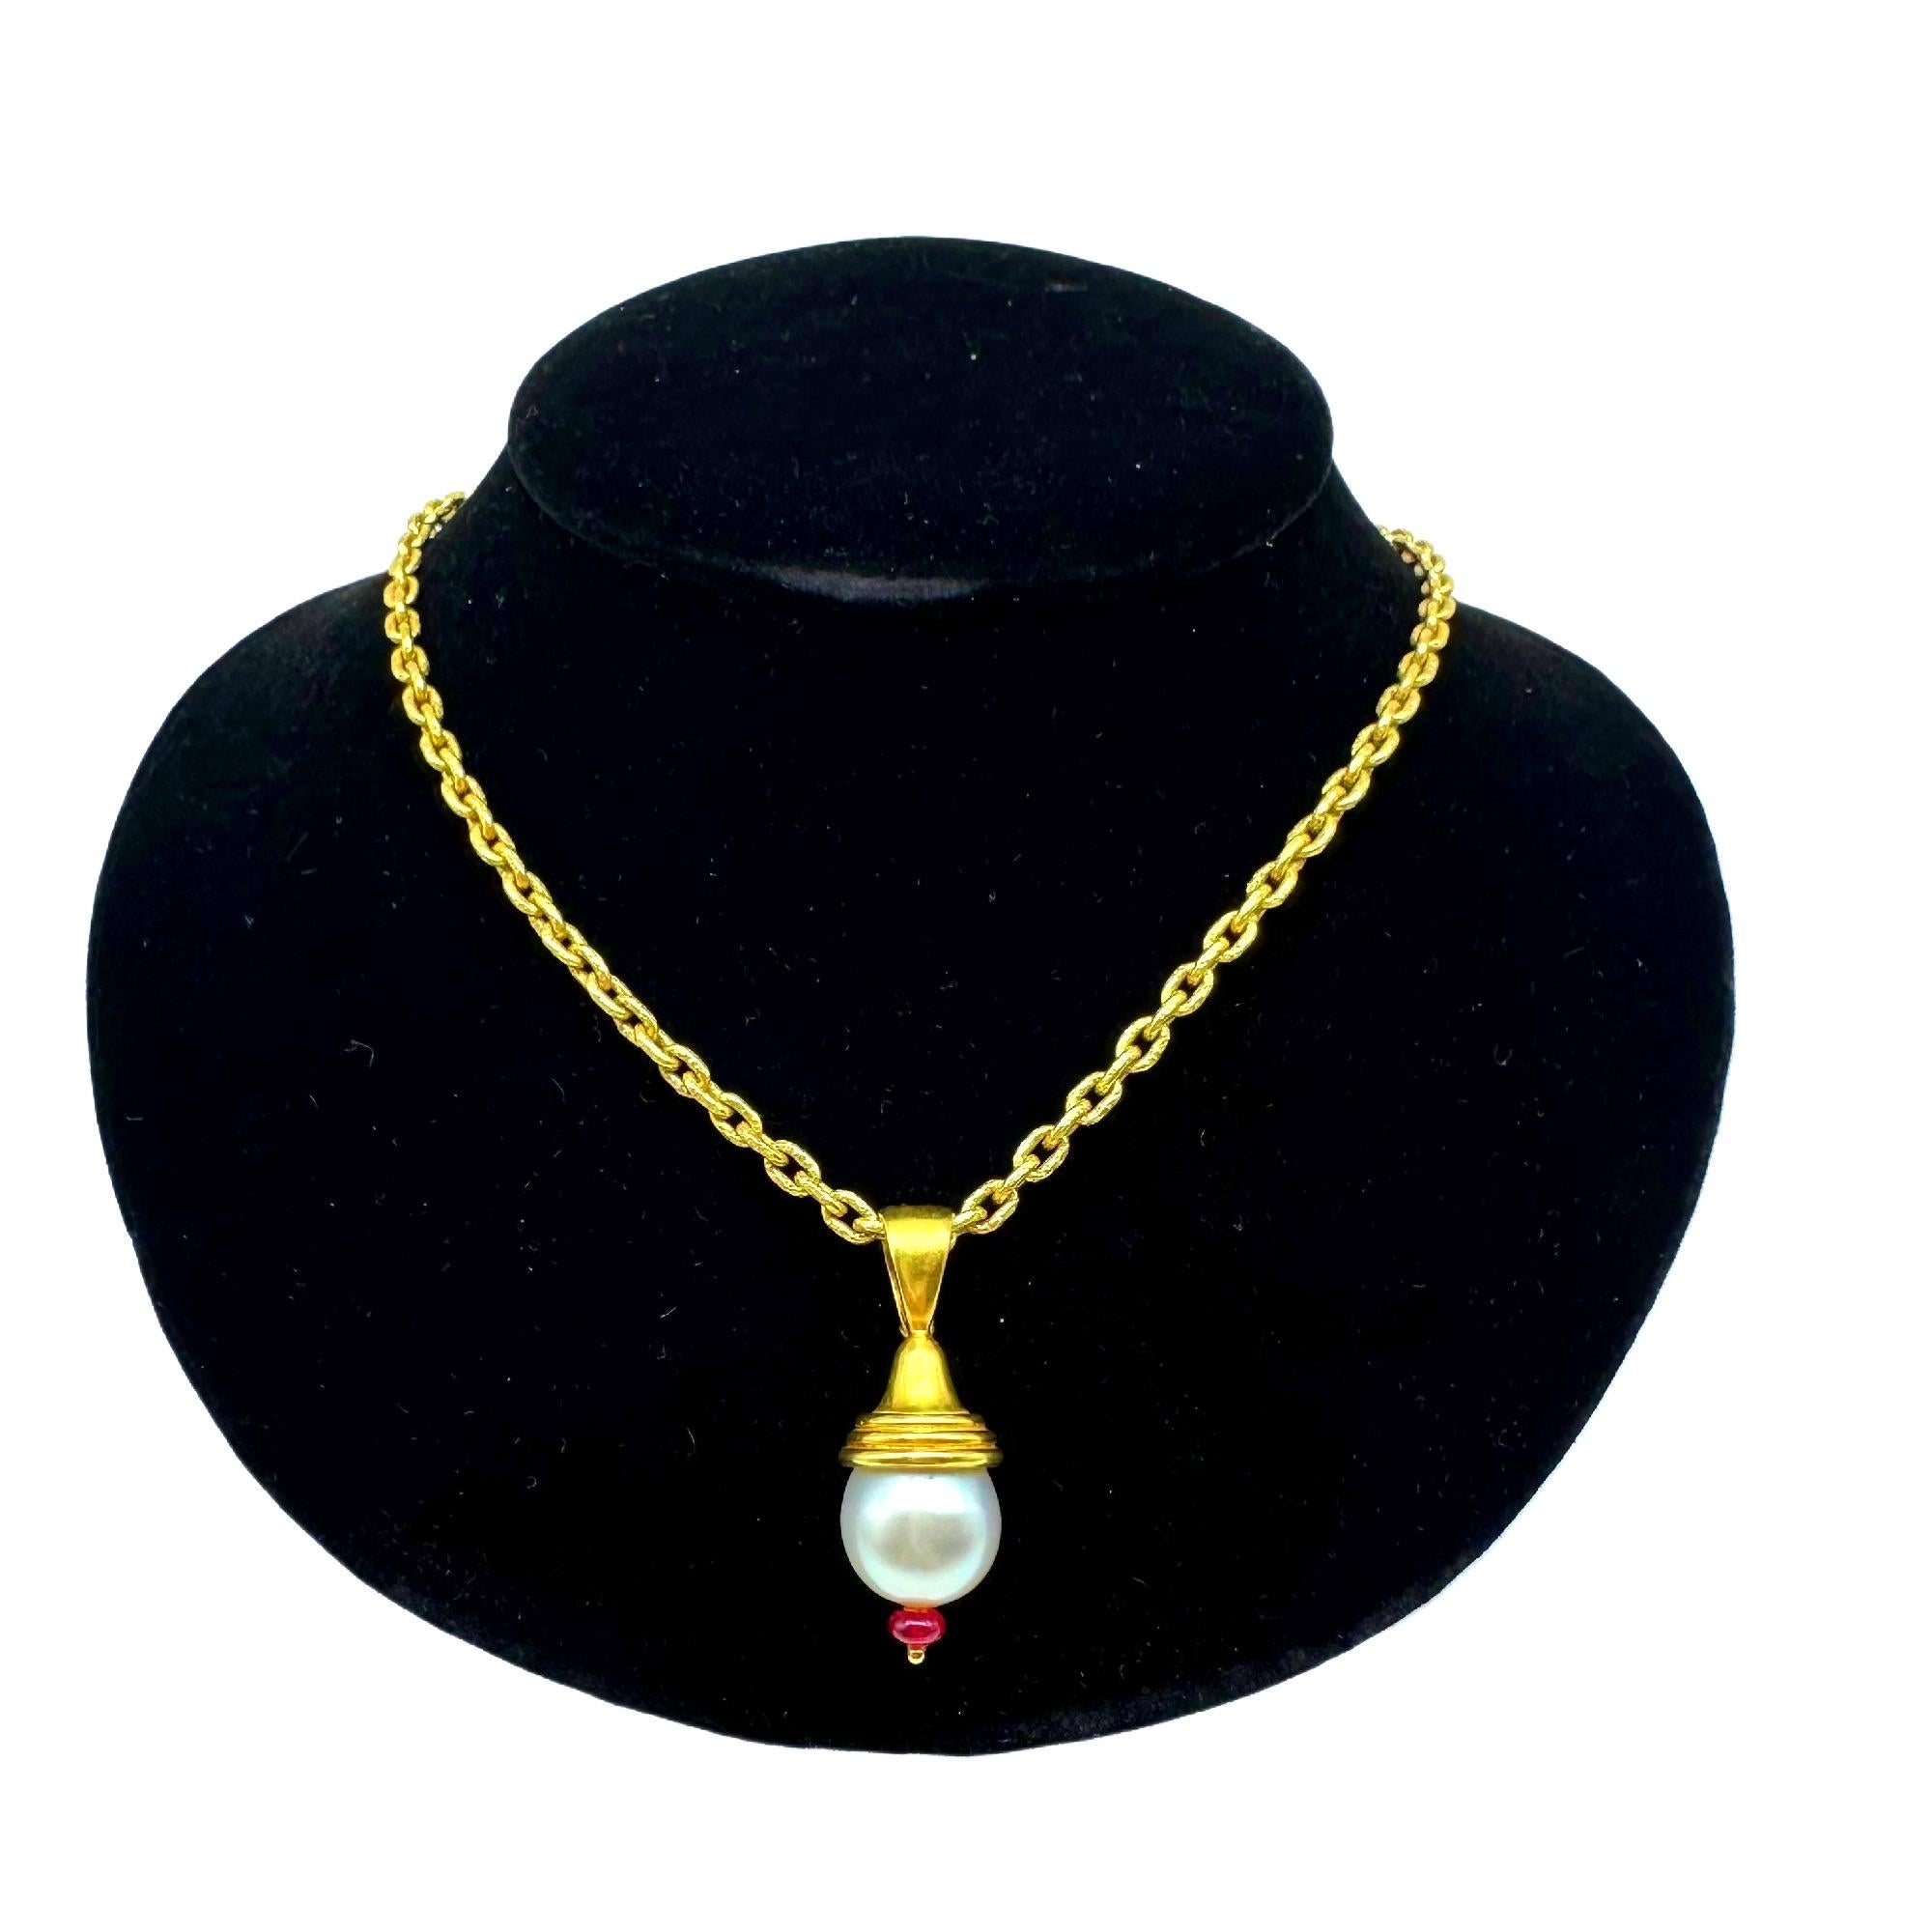 Elizabeth Locke 15 MM South Sea Pearl Venetian Glass 19K Hammered Gold Pendant In Excellent Condition For Sale In San Diego, CA